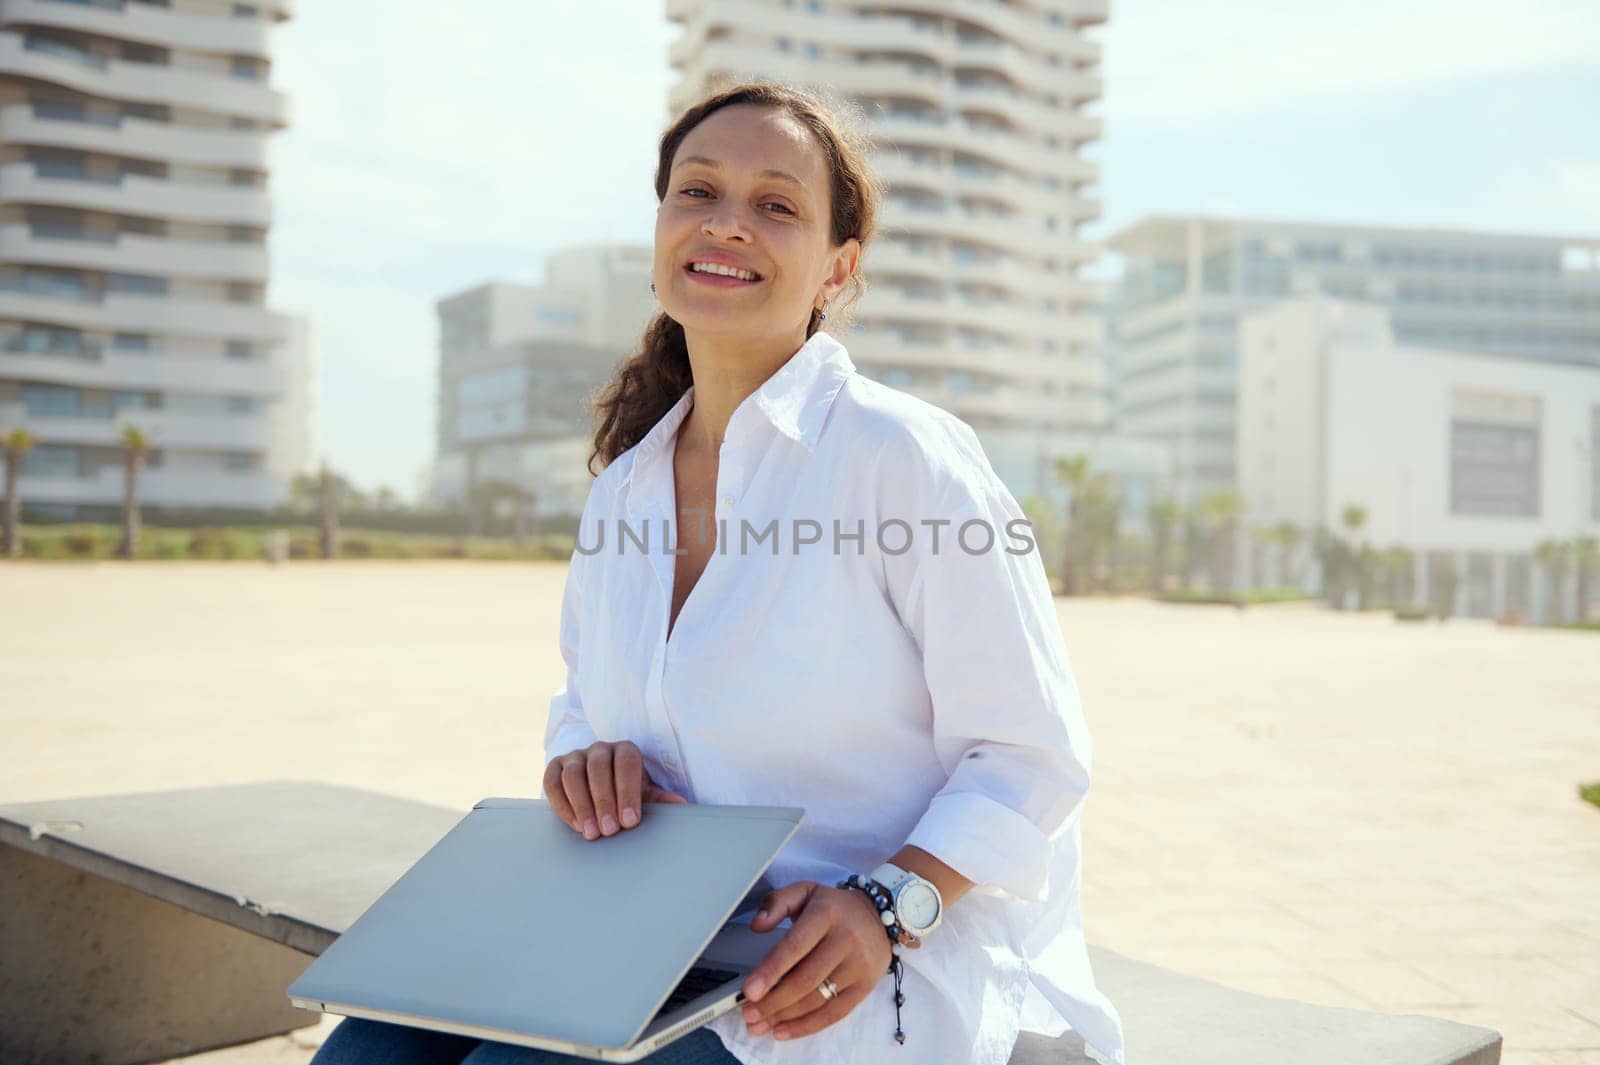 Authentic multi ethnic business lady, freelance entrepreneur, holding laptop and smiling looking at camera, sitting on bench outdoors. People. Career. Recruitment. Online business. Remote job